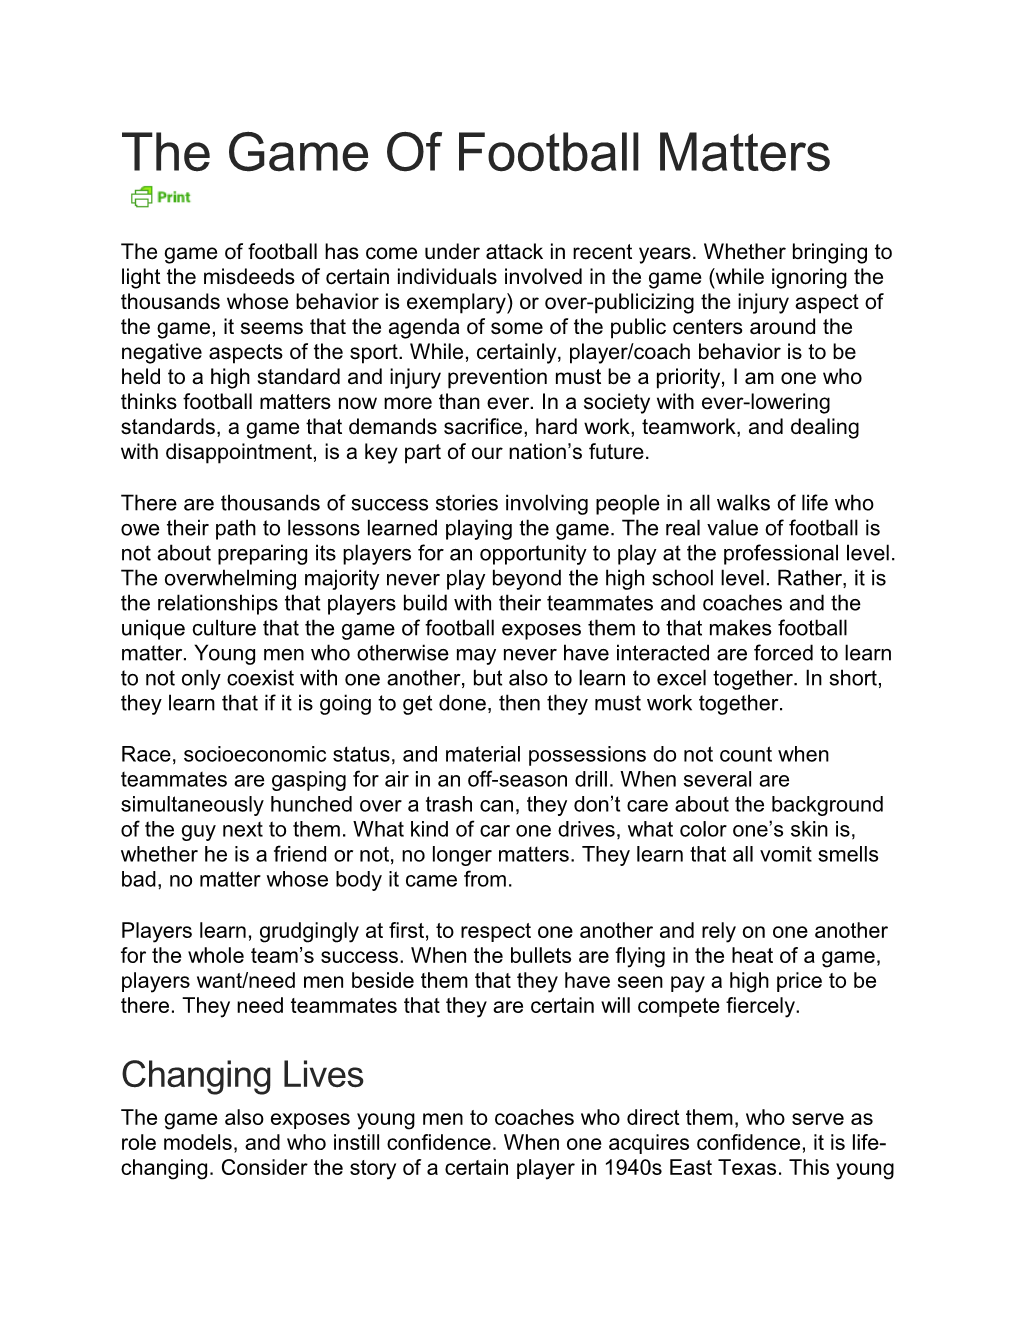 The Game of Football Matters